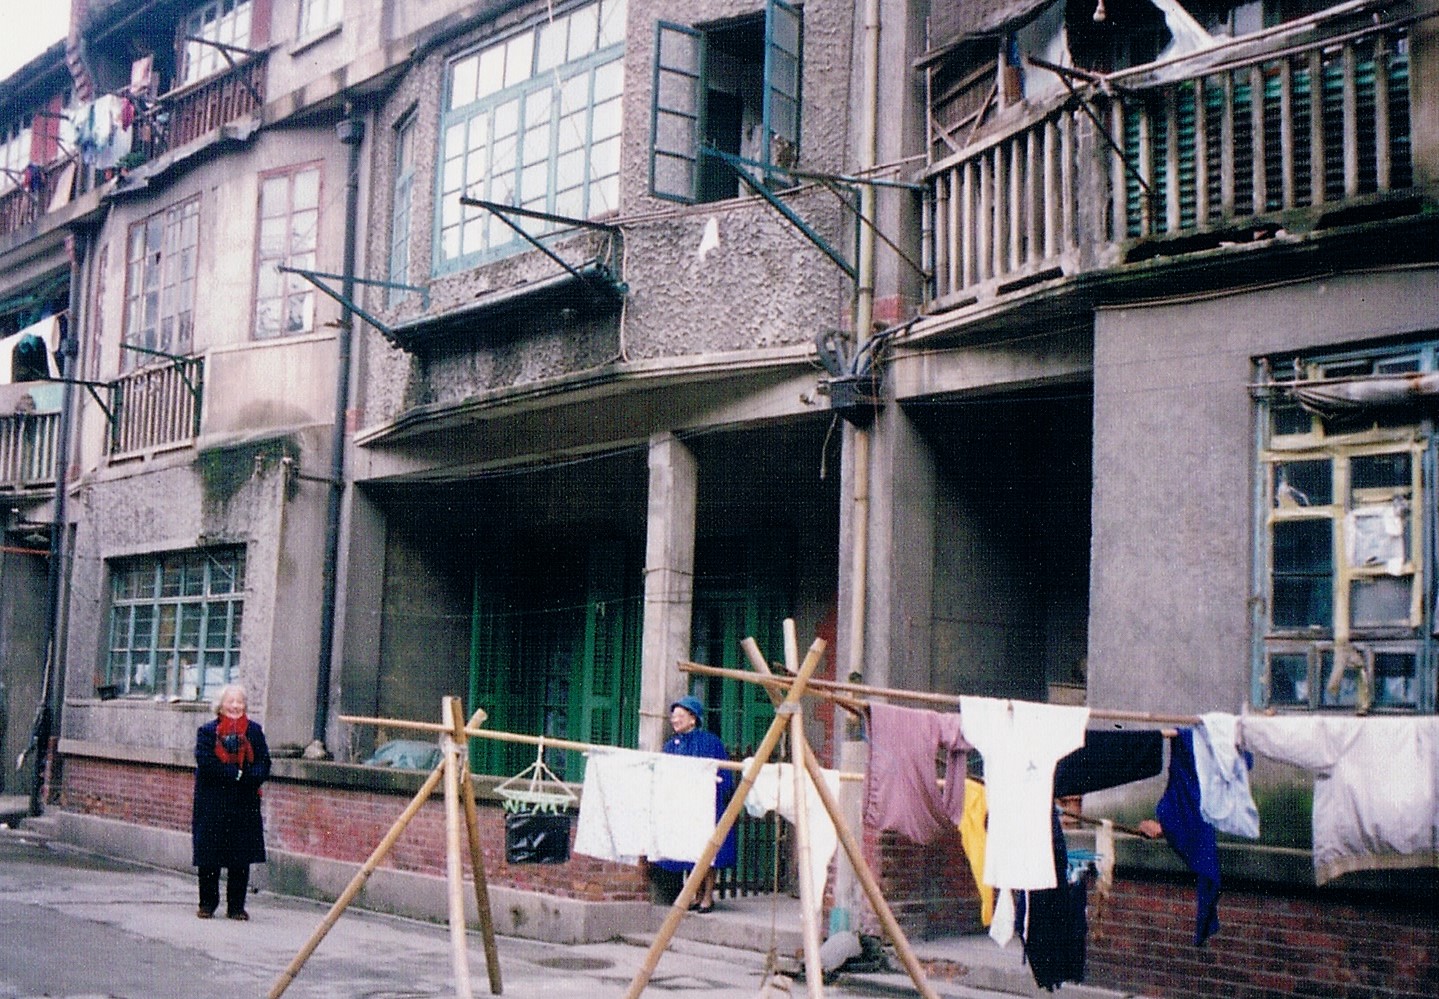 House at 3 Kiangwan Road, Shanghai, near the railway station where the Nationalists arrived in 1927.